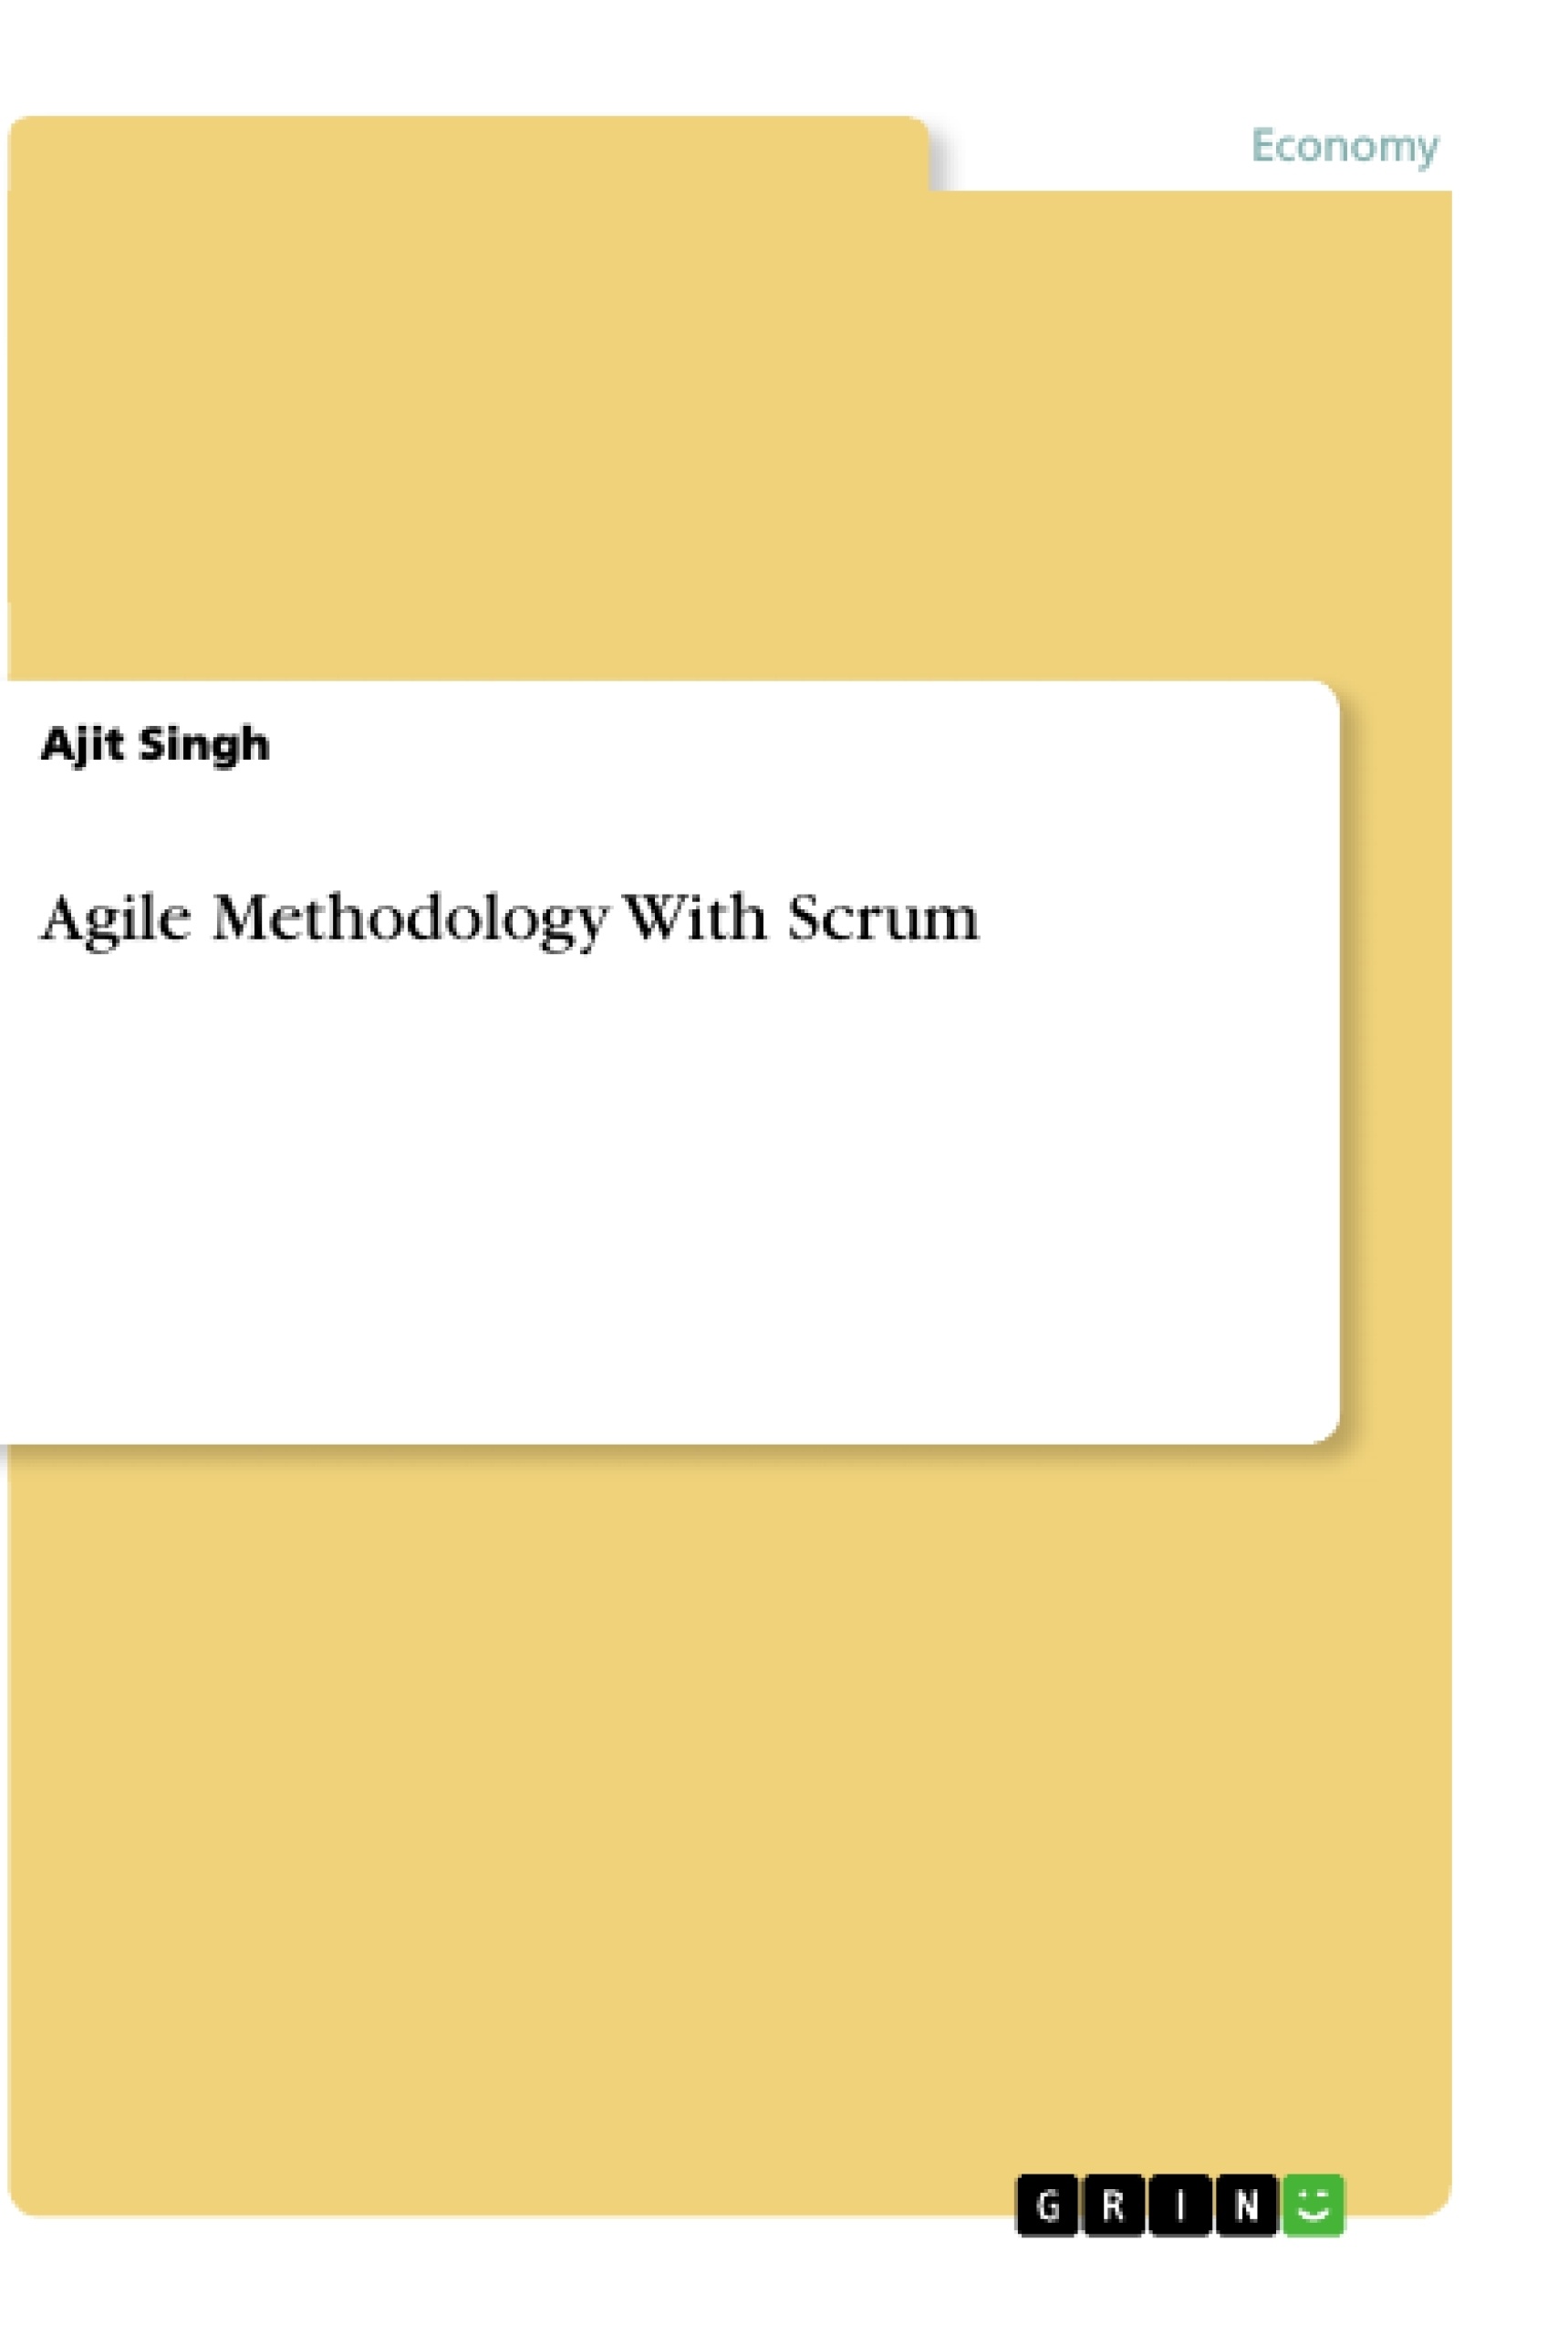 Title: Agile Methodology With Scrum